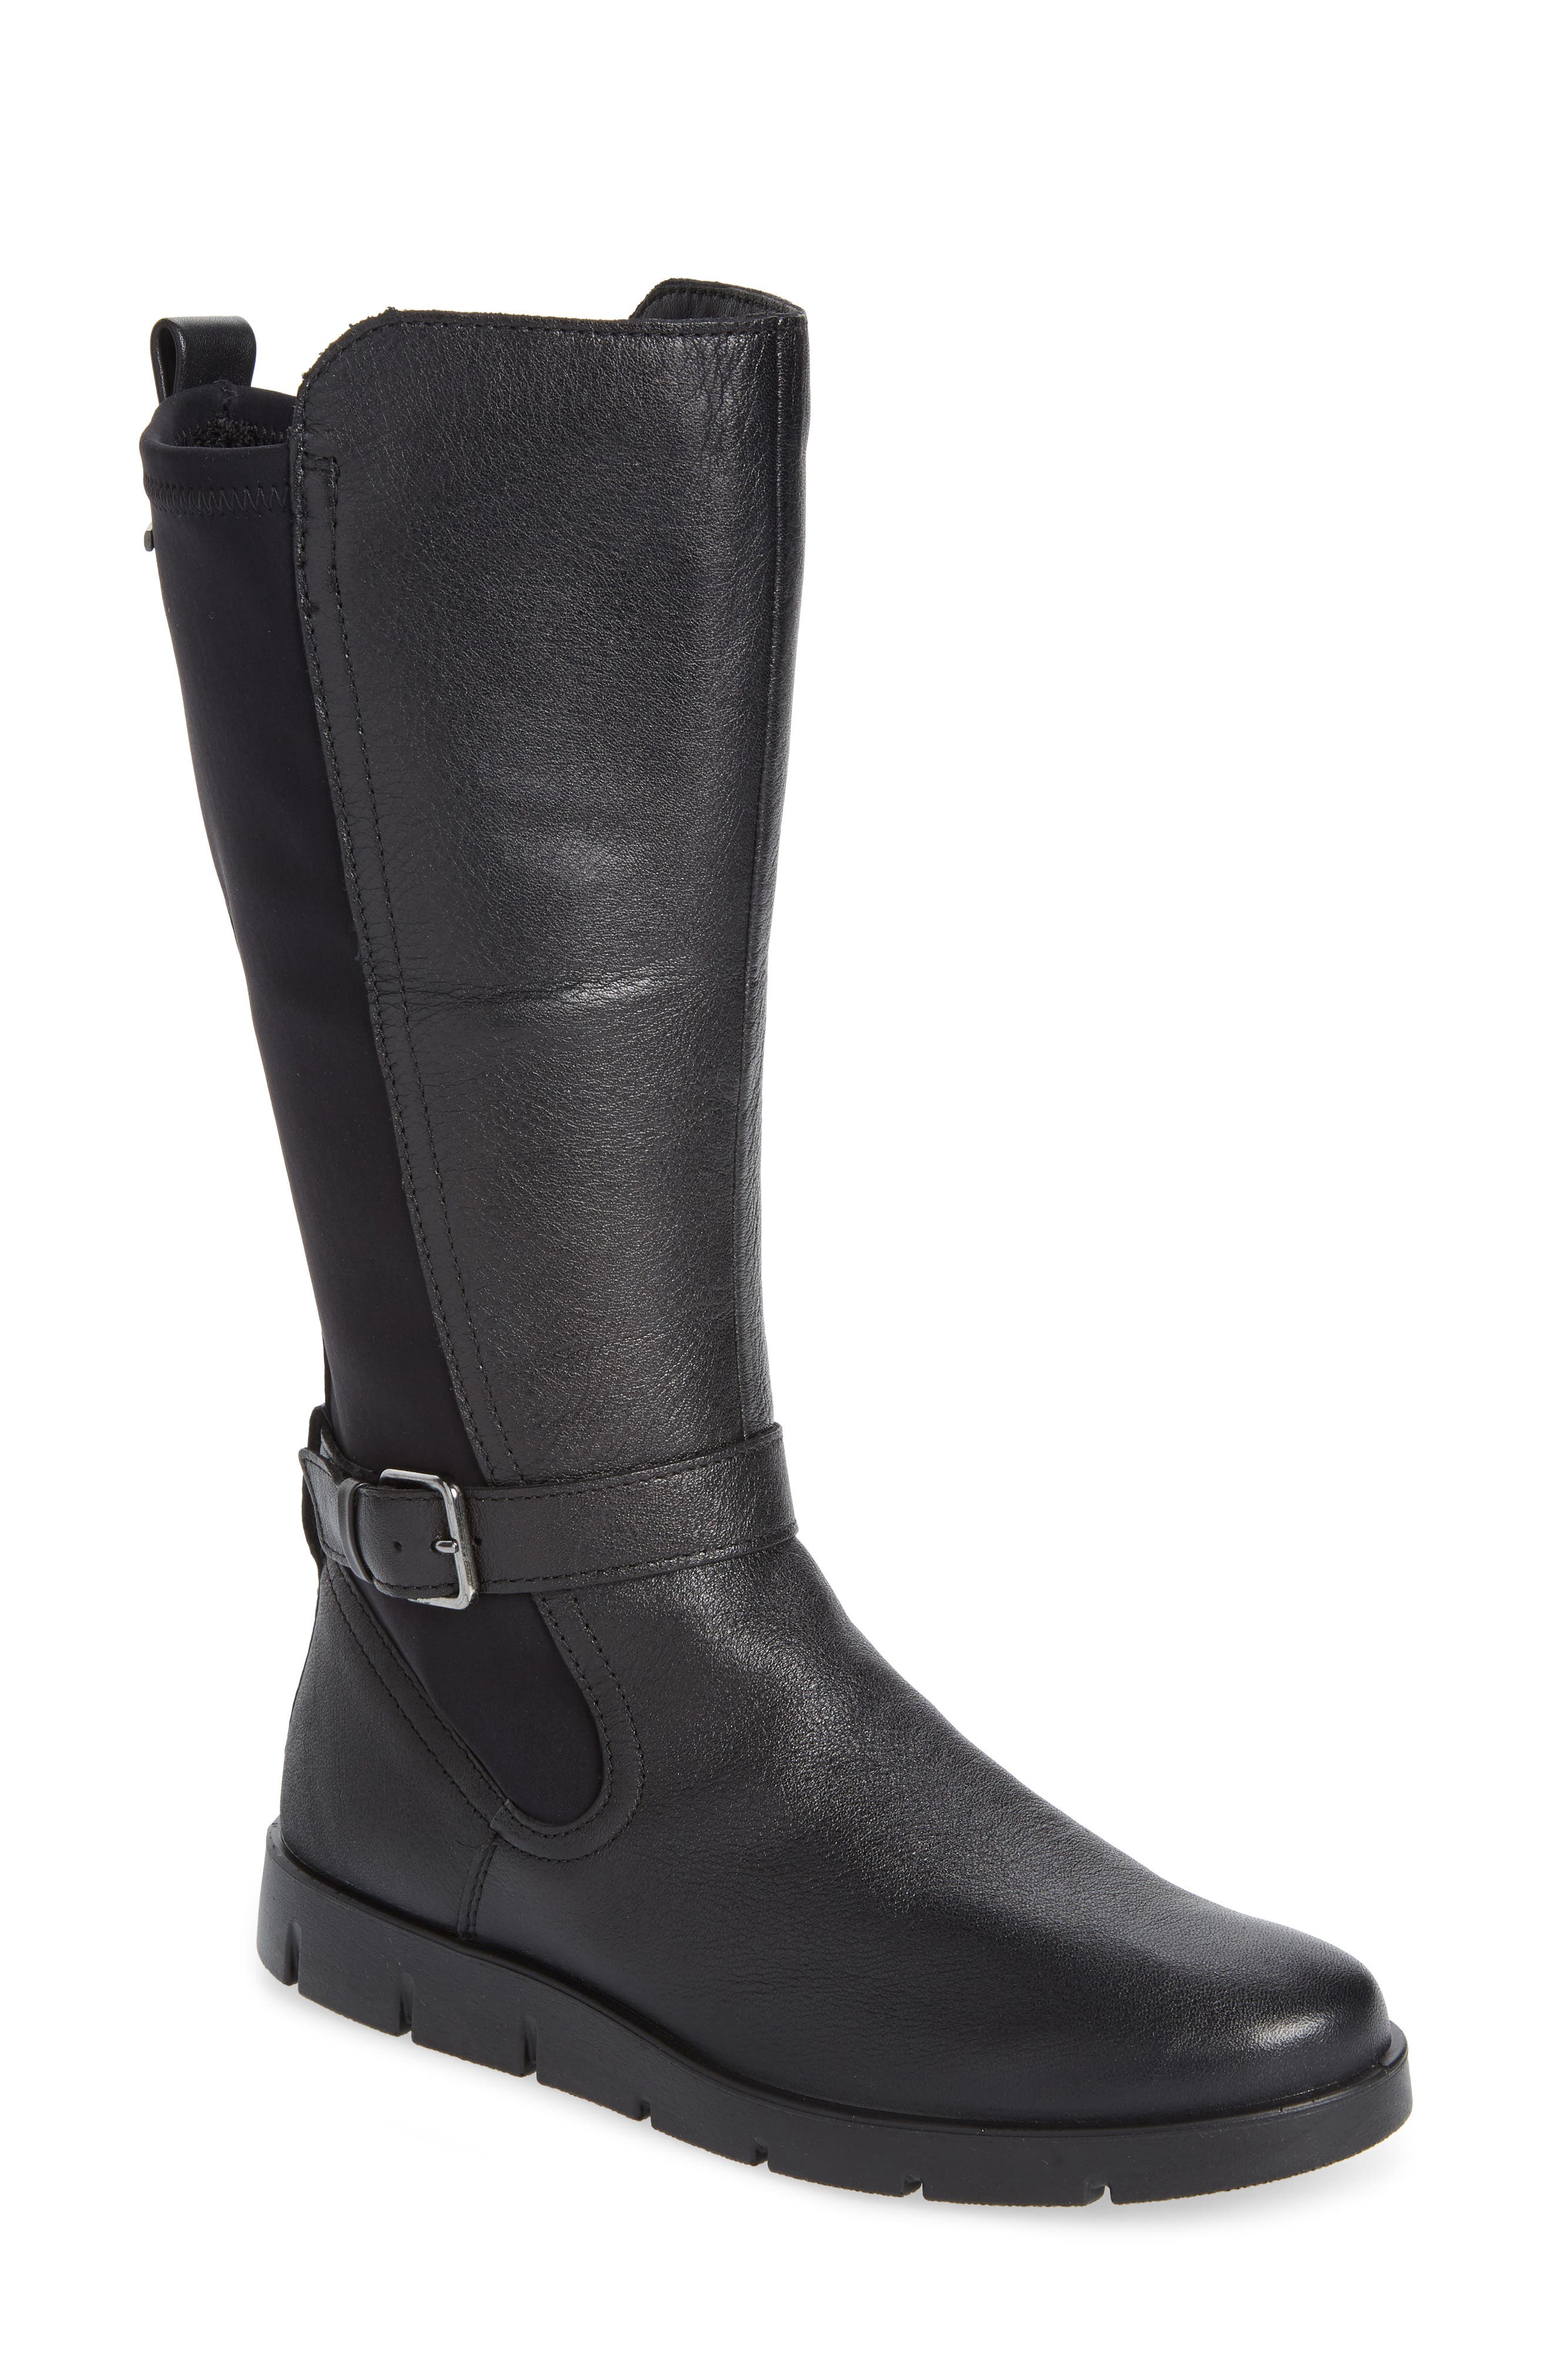 UPC 809704630717 product image for Women's Ecco Bella Water Resistant Tall Boot, Size 7-7.5US / 38EU - Black | upcitemdb.com